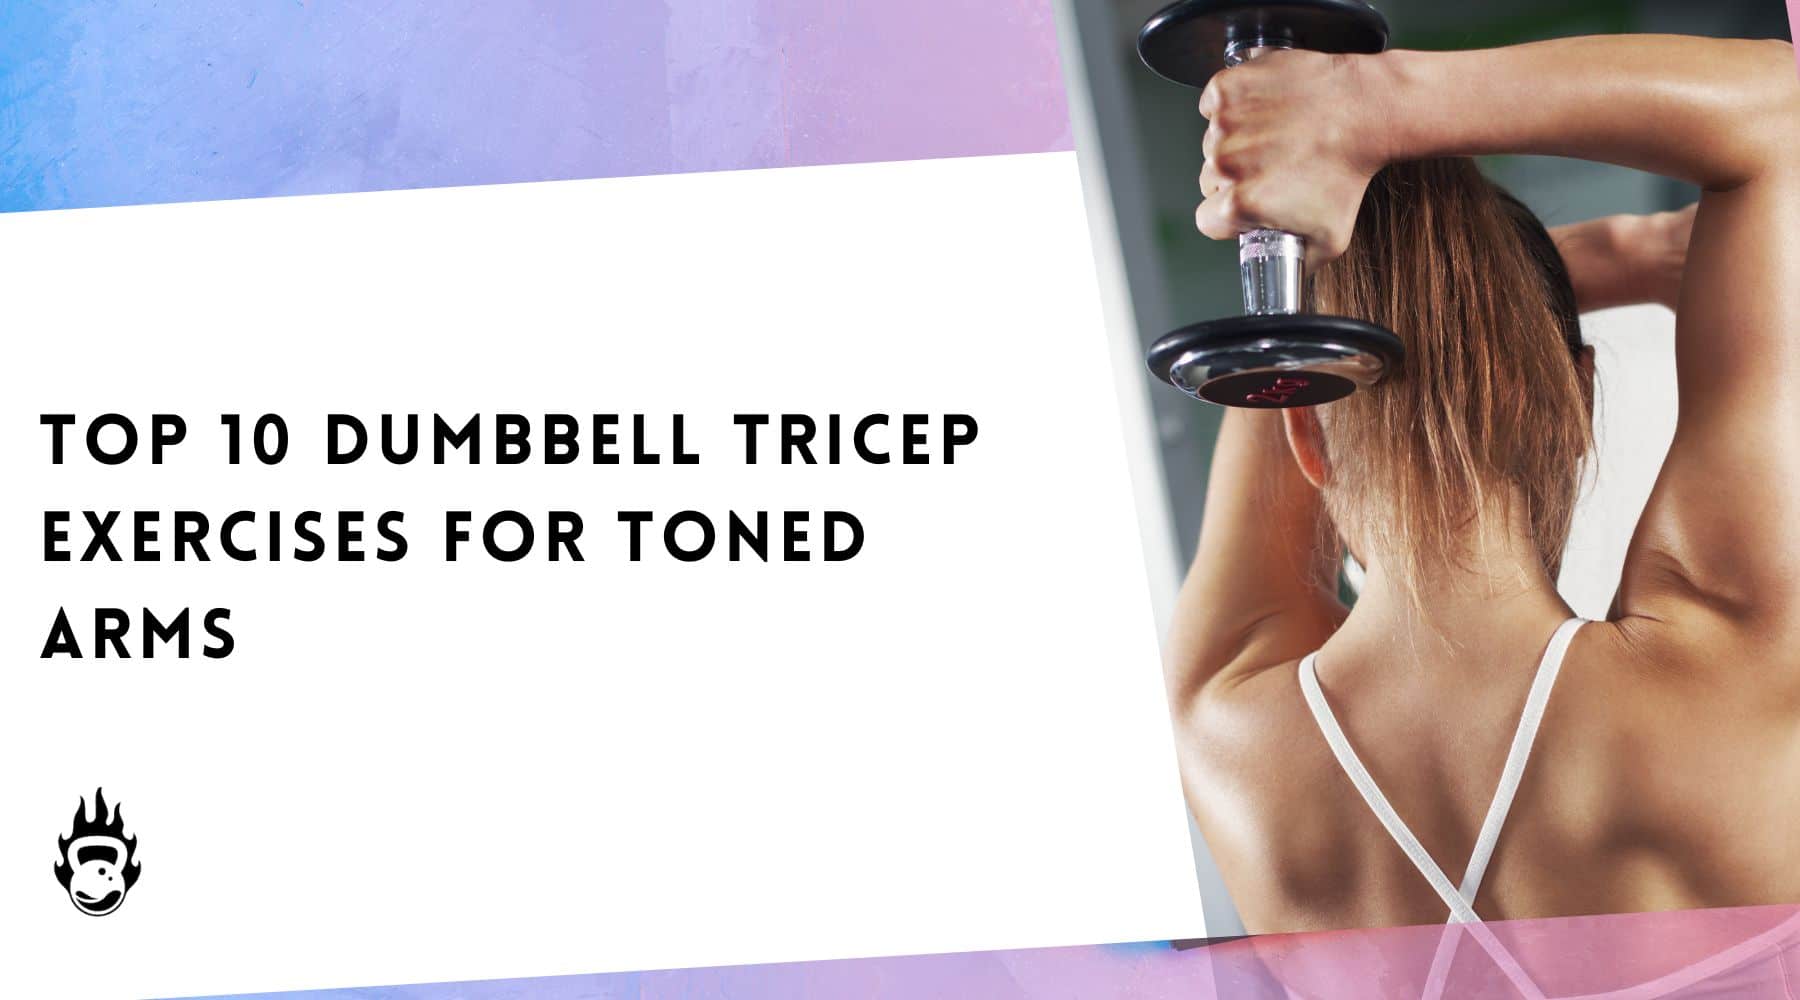 Tricep press will tone your upper arms